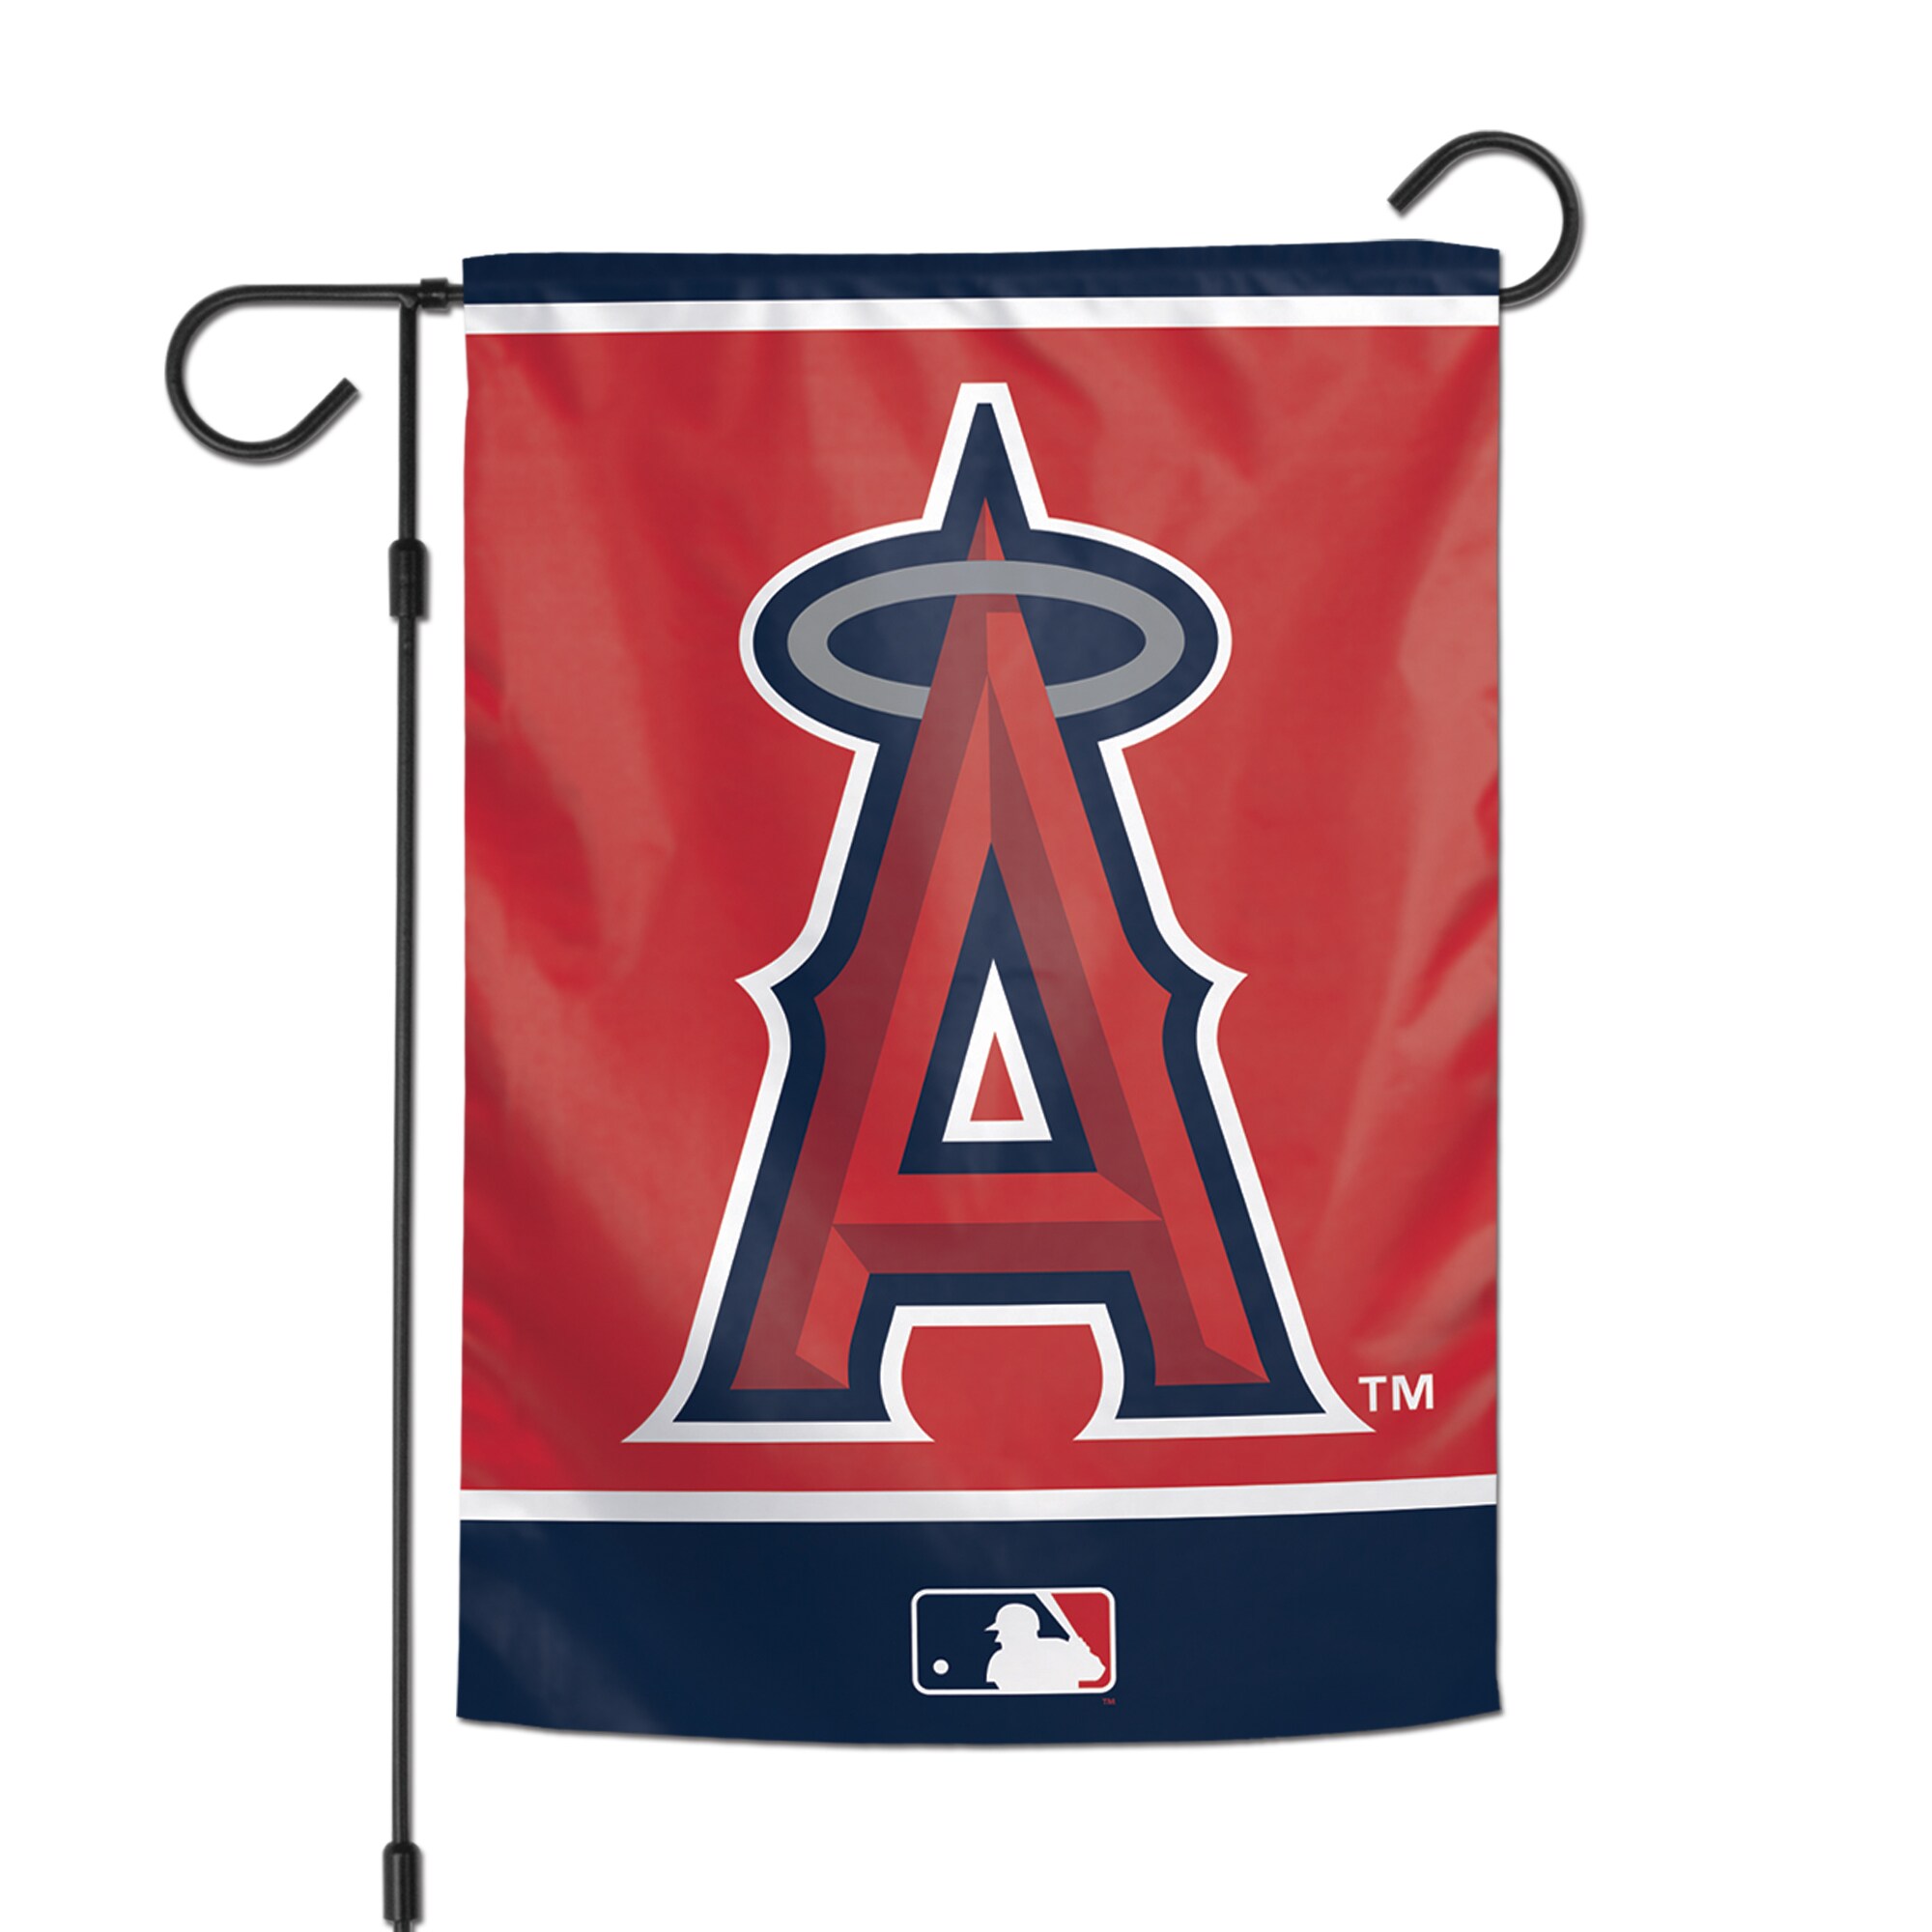 Show your love for the Los Angeles Angels with this double-sided garden flag from WinCraft!Brand: WinCraftOfficially licensedMade in the USASublimated graphicsMaterial: 100% PolyesterFlag stand not includedMeasures approx. 12" x 18"Double-sided designWipe clean with a damp clothPrinted in the USA